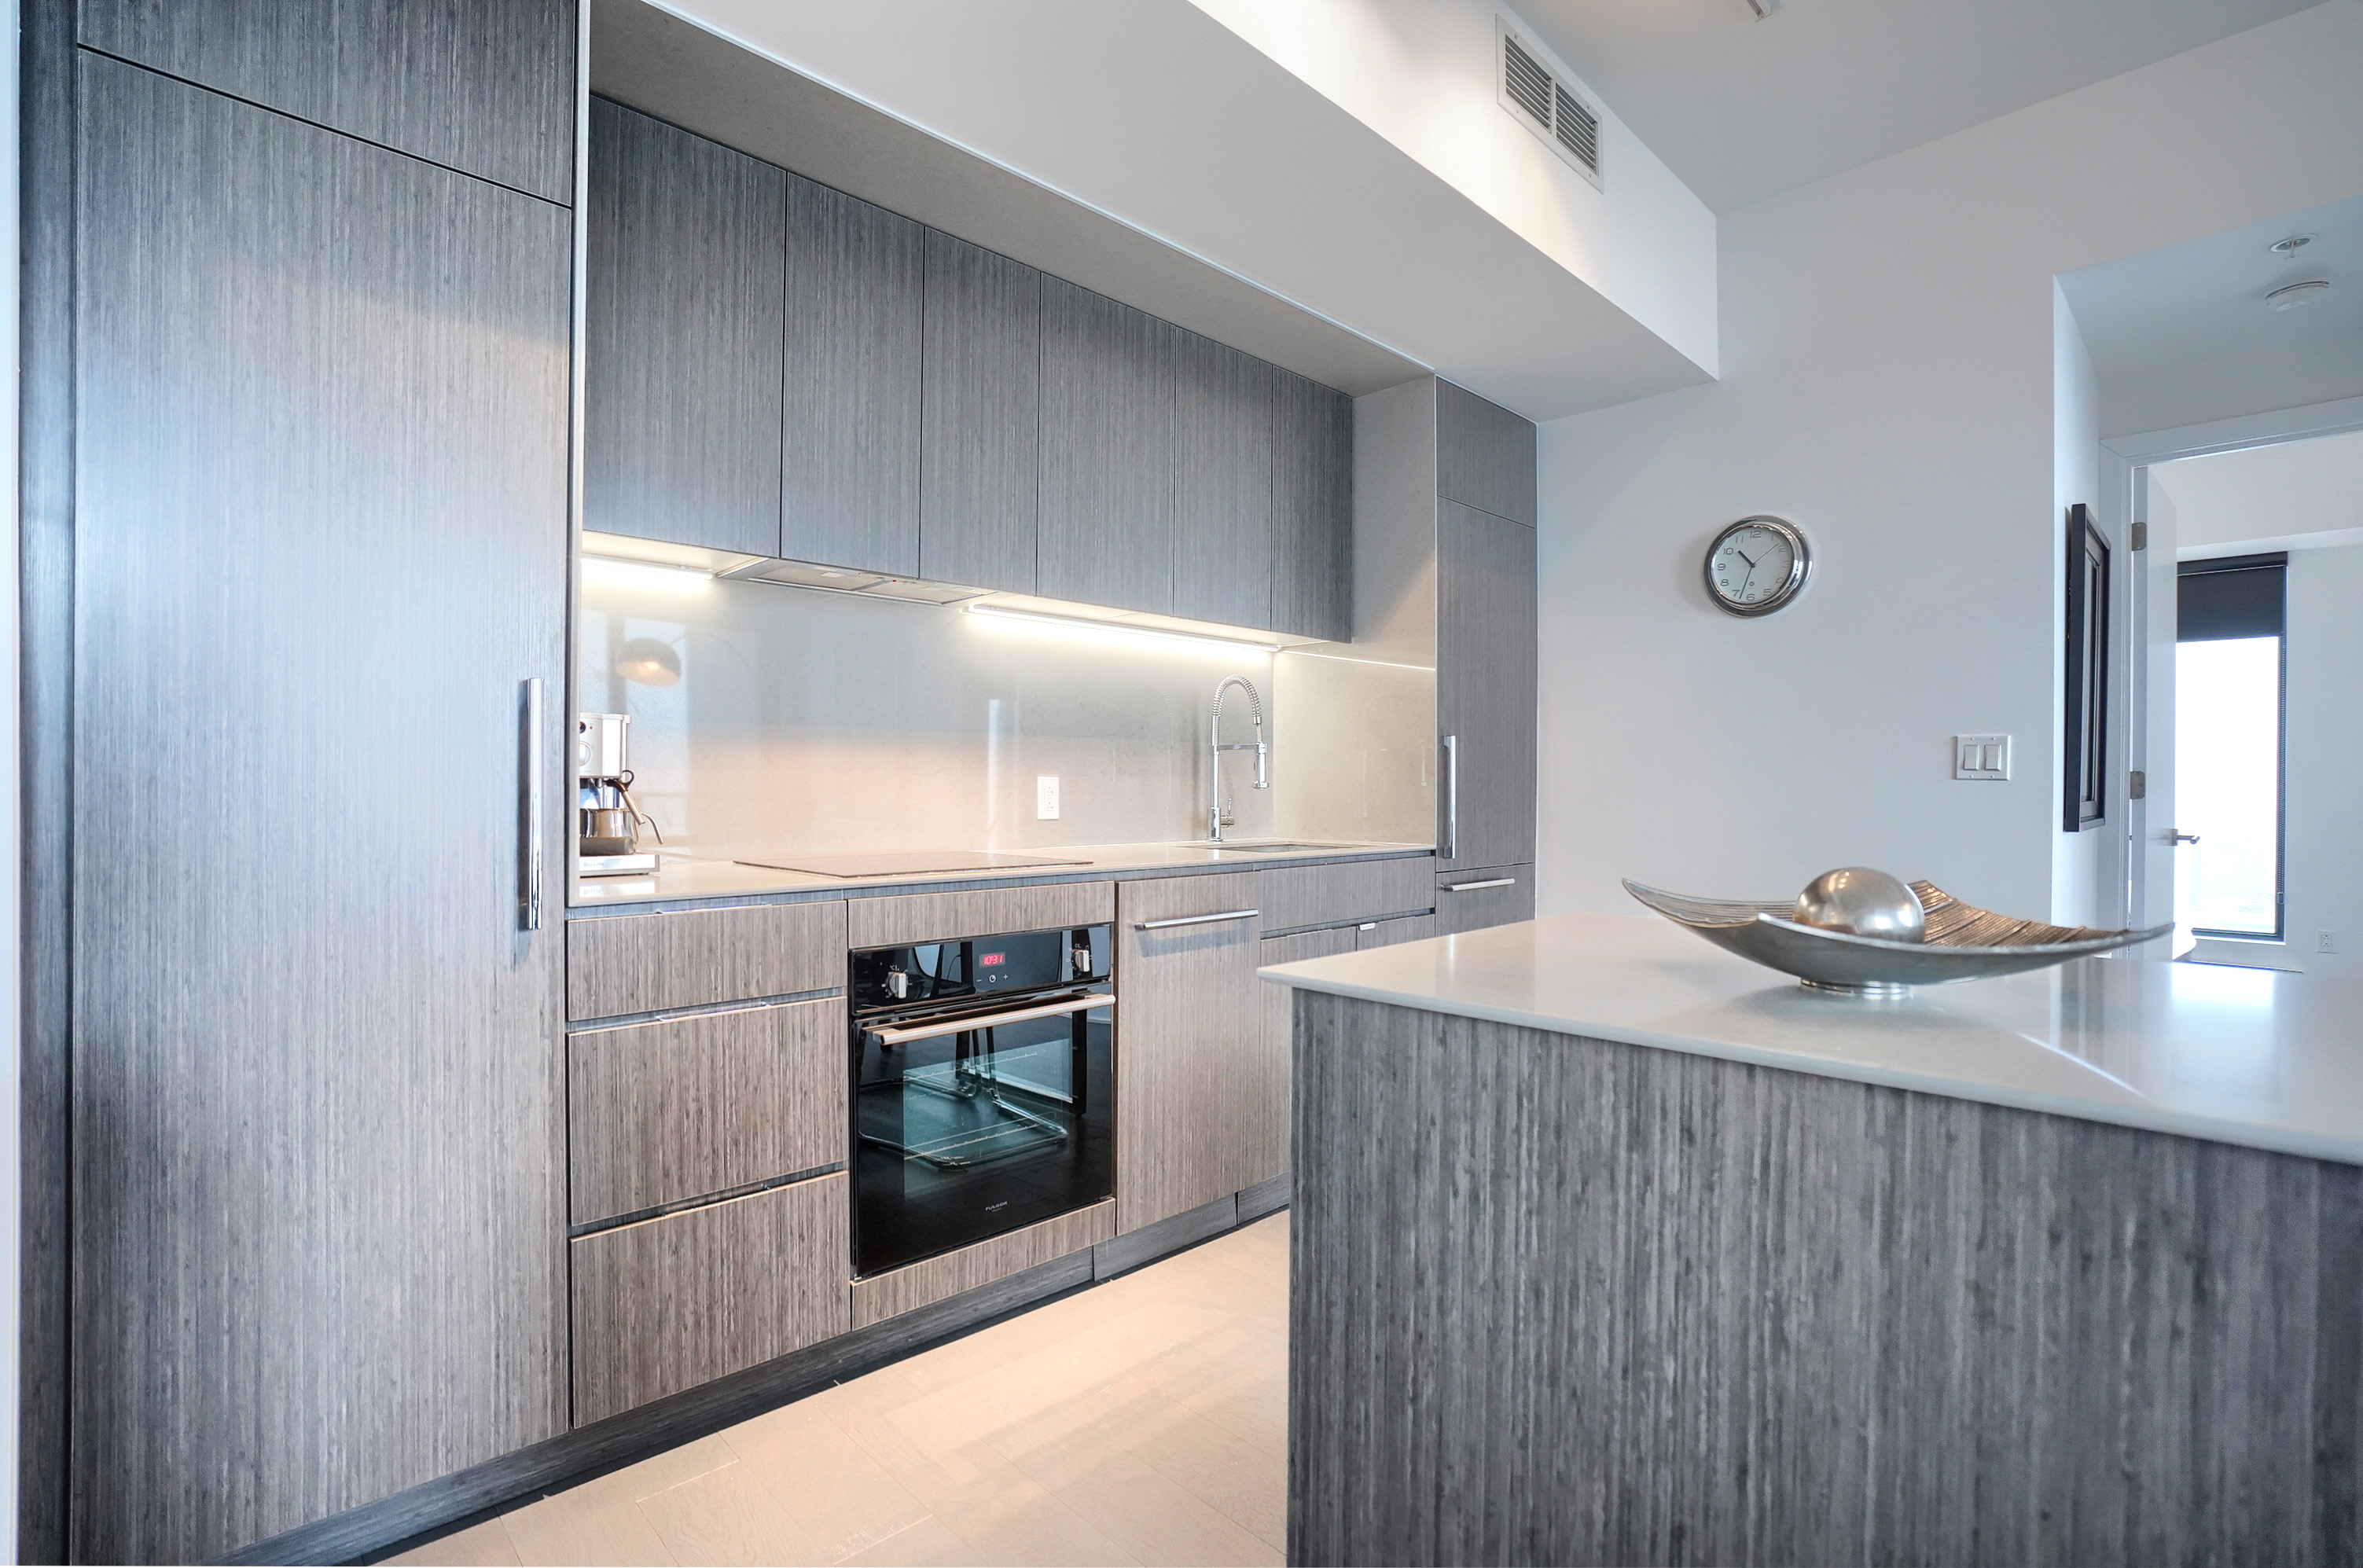 Wide-angle view into the kitchen. Darker gray cabinetry against light gray/white walls. Spacious and modern kitchen with all the amenities in this furnished corporate suite in montreal